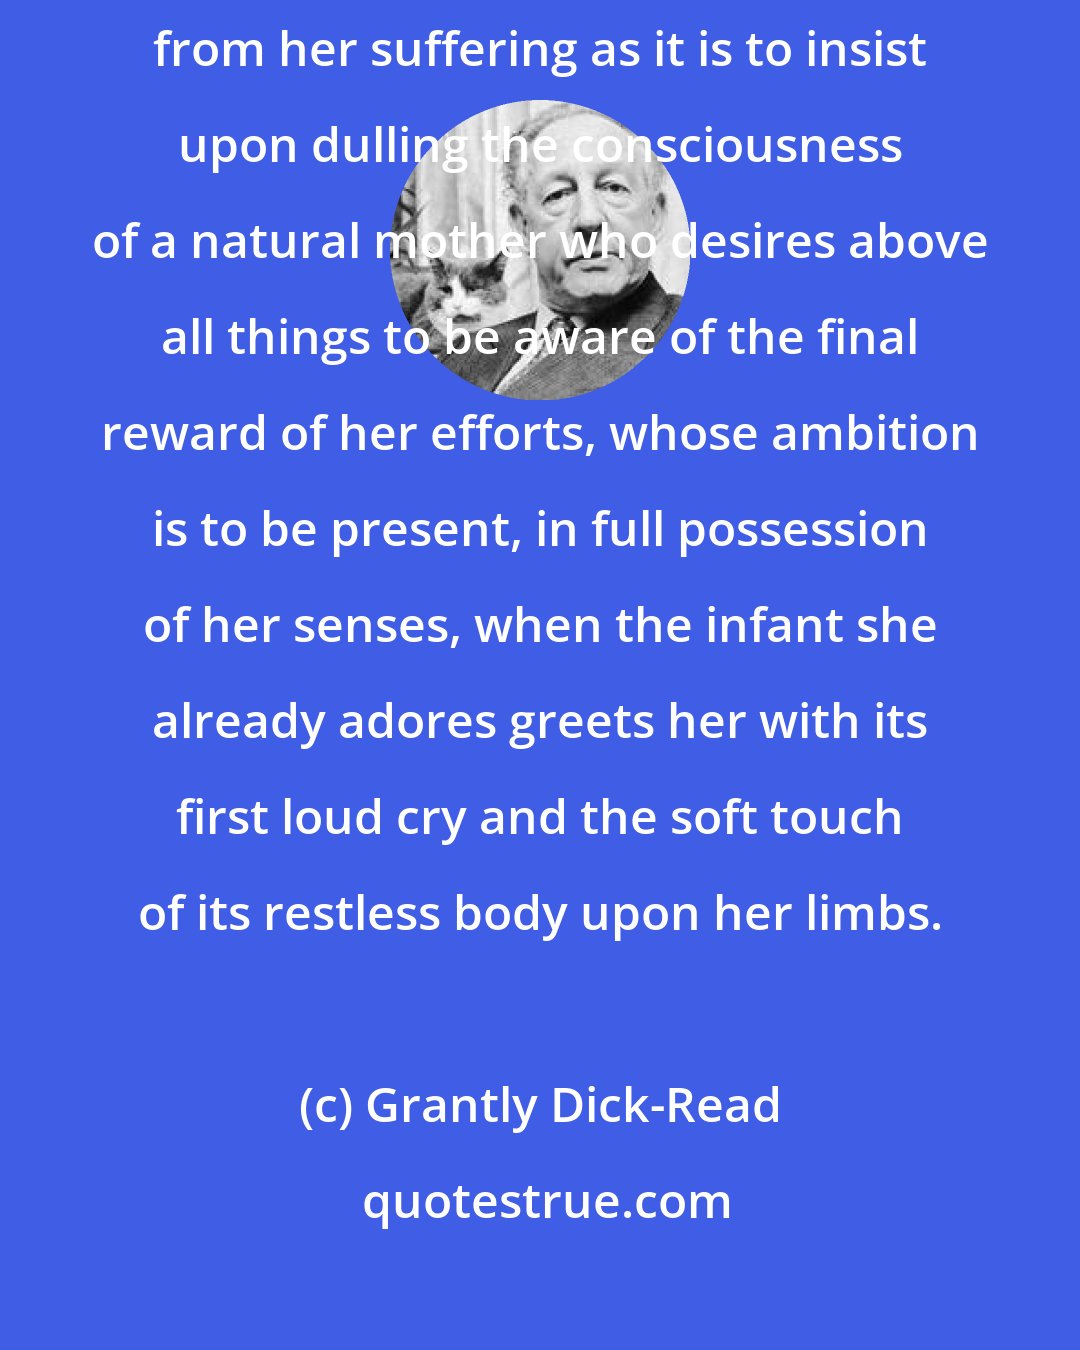 Grantly Dick-Read: It is as great a crime to leave a woman alone in her agony and deny her relief from her suffering as it is to insist upon dulling the consciousness of a natural mother who desires above all things to be aware of the final reward of her efforts, whose ambition is to be present, in full possession of her senses, when the infant she already adores greets her with its first loud cry and the soft touch of its restless body upon her limbs.